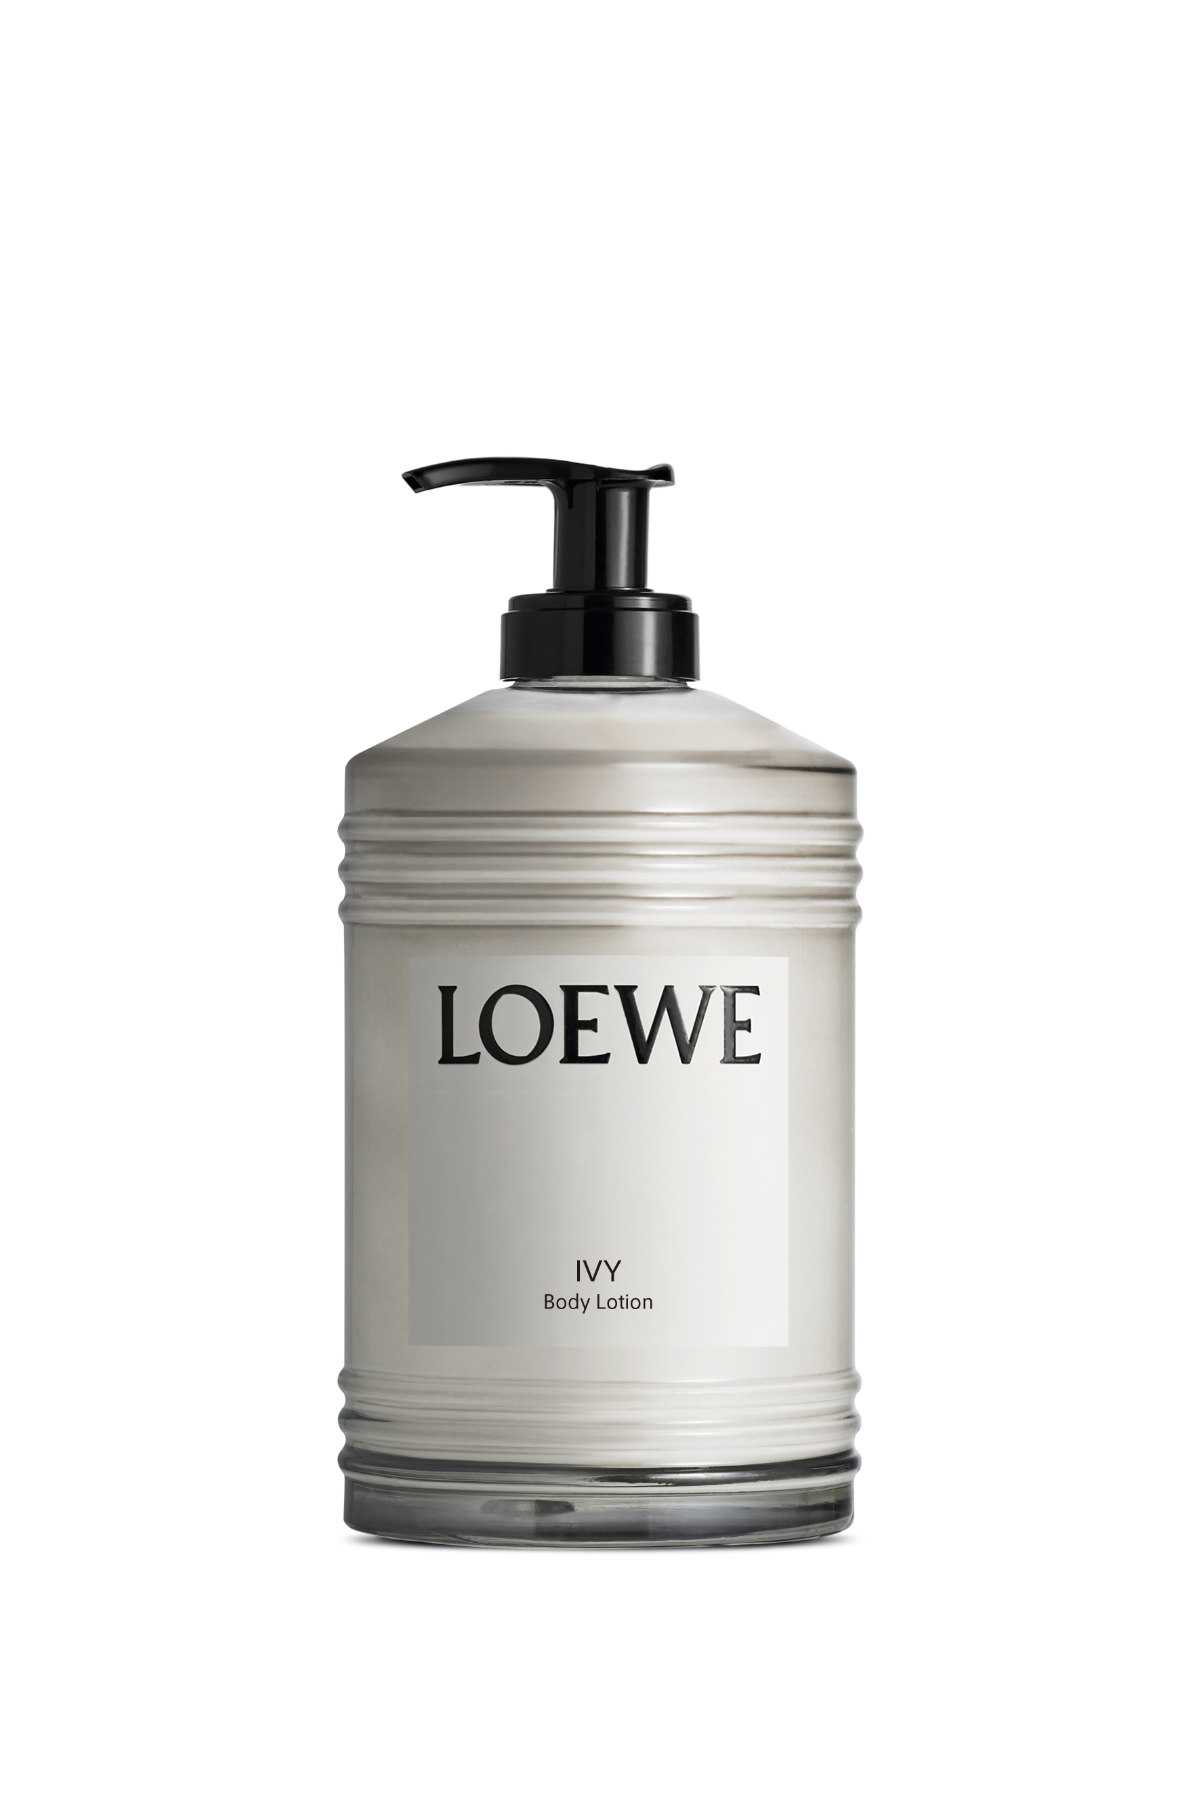 Ivy Joins The LOEWE Home Scents Bath And Body Line